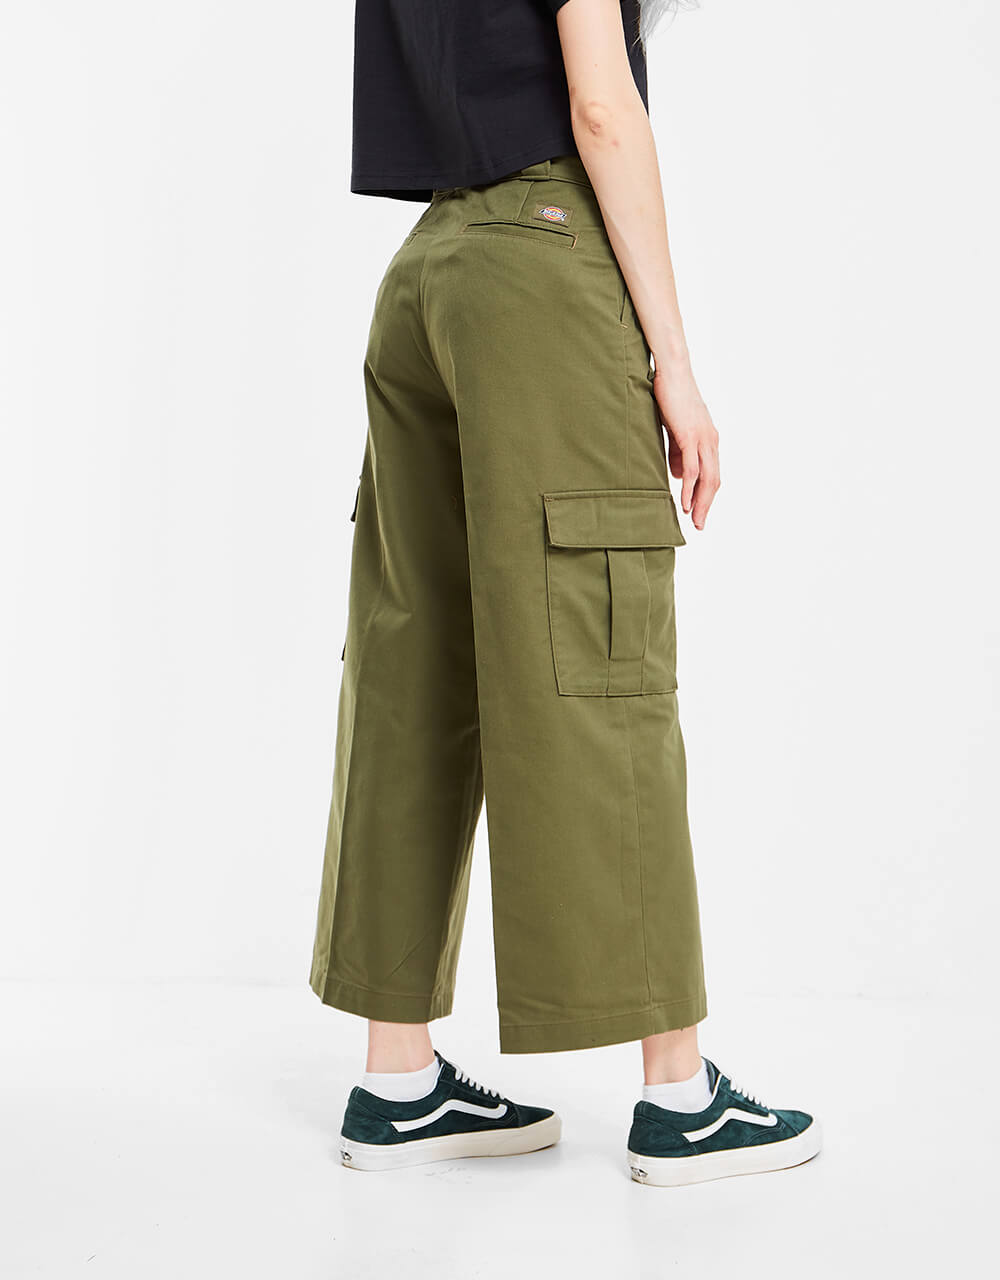 Dickies Womens Hockinson Cargo Pant - Stone Washed Military Green